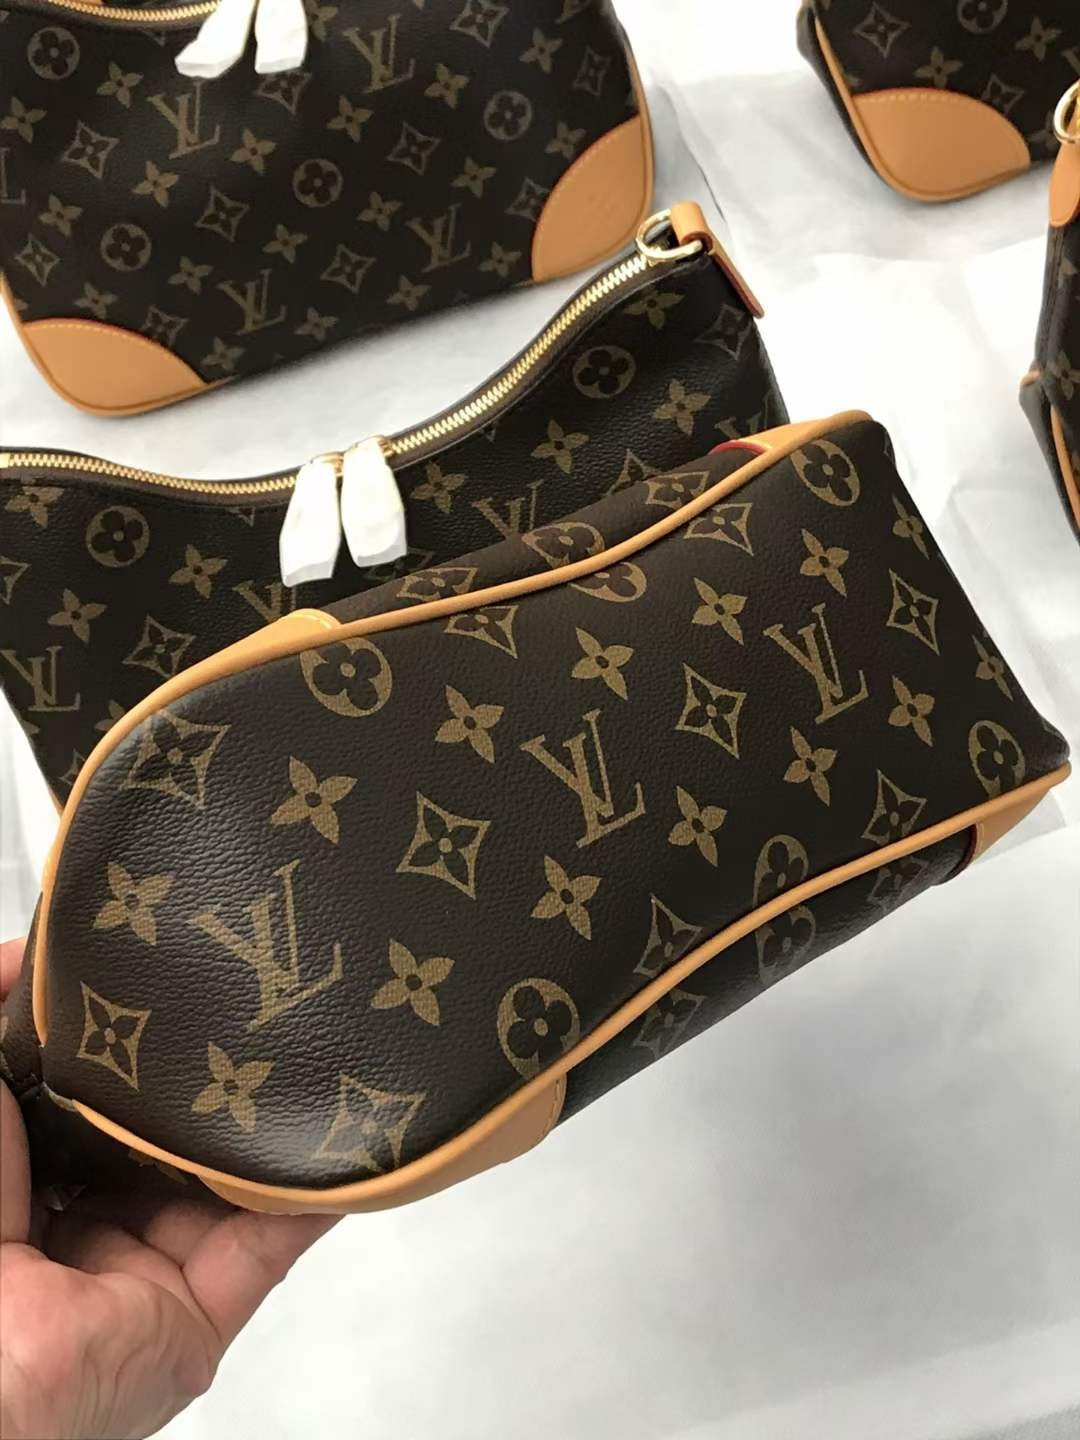 Louis Vuitton M45832 croissant with yellow leather Boulogne top replica handbags Lot Inspection (2022 Special)-Best Quality Fake designer Bag Review, Replica designer bag ru